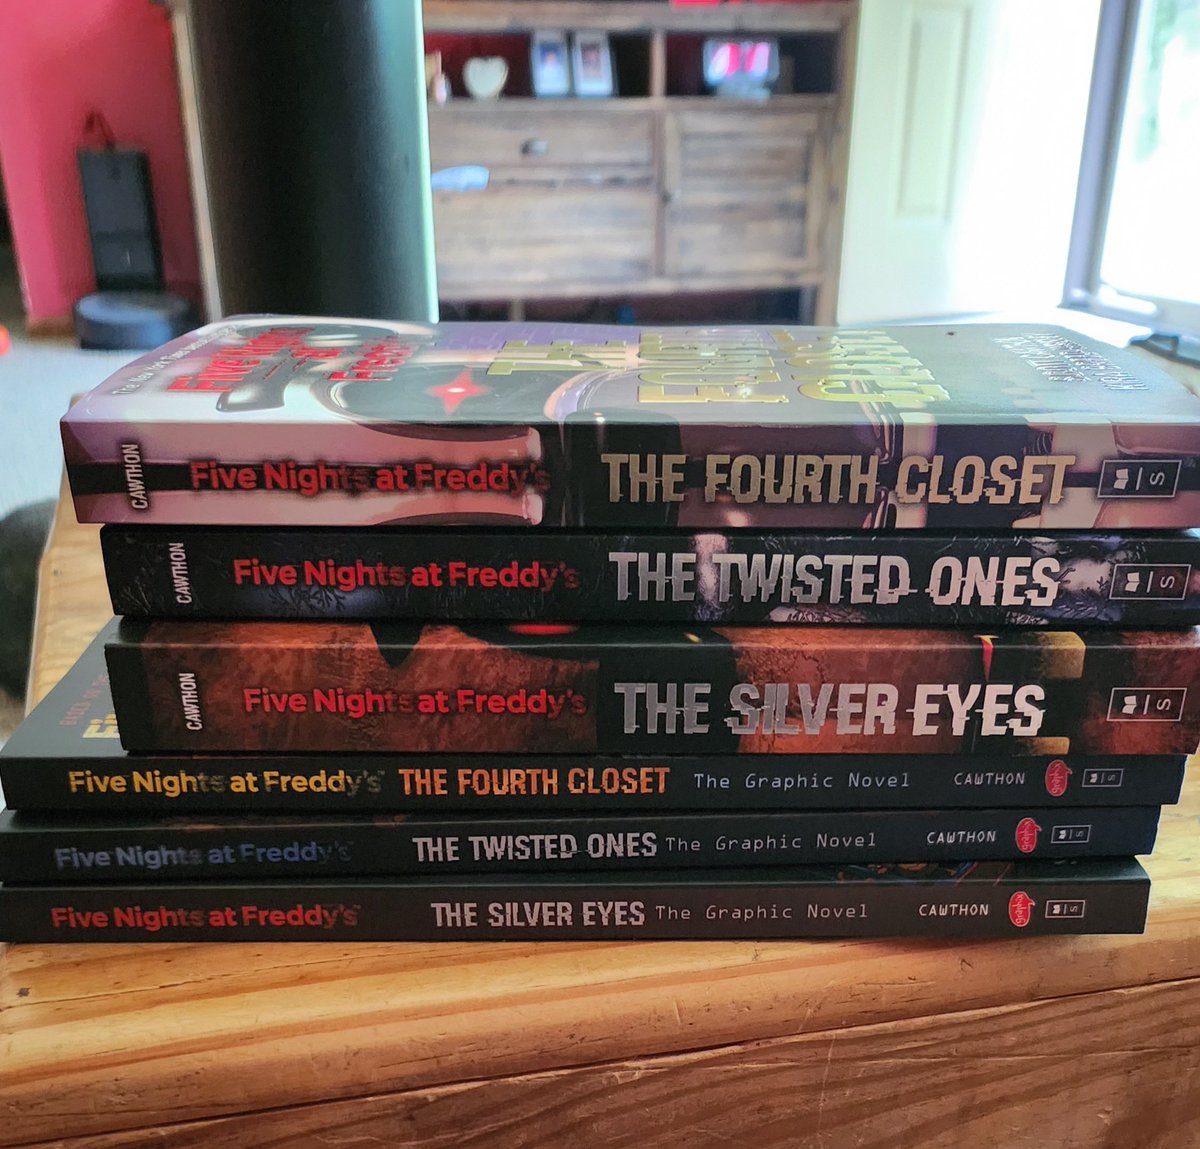 I bought a few fnaf books today